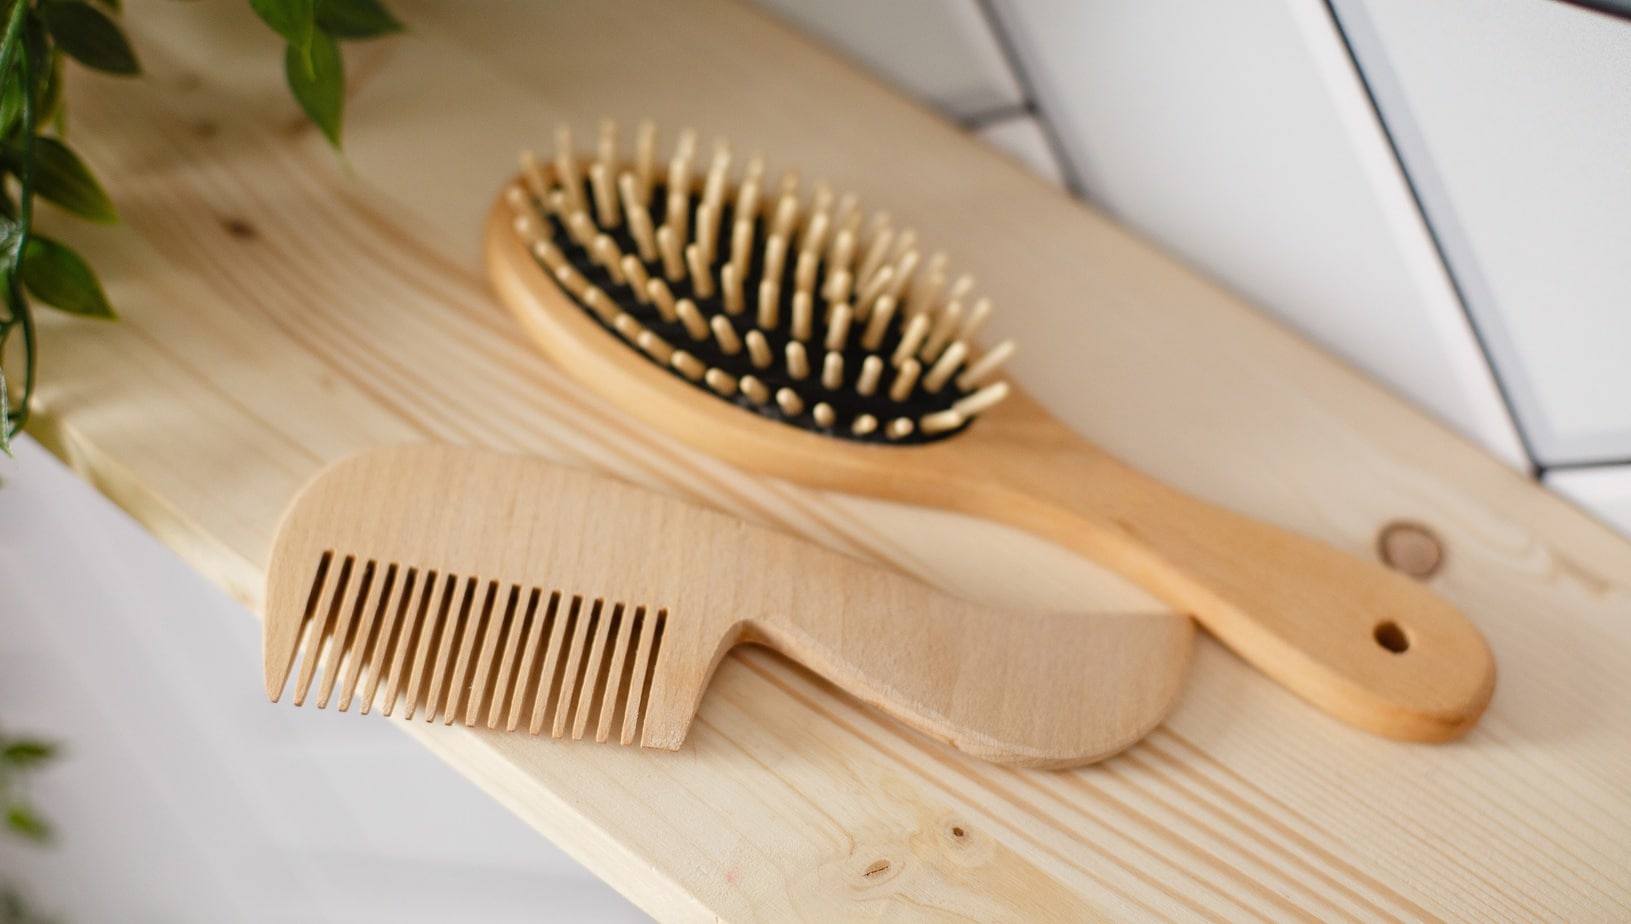 Brush or Comb? We tell you how to choose the best hair styling tool